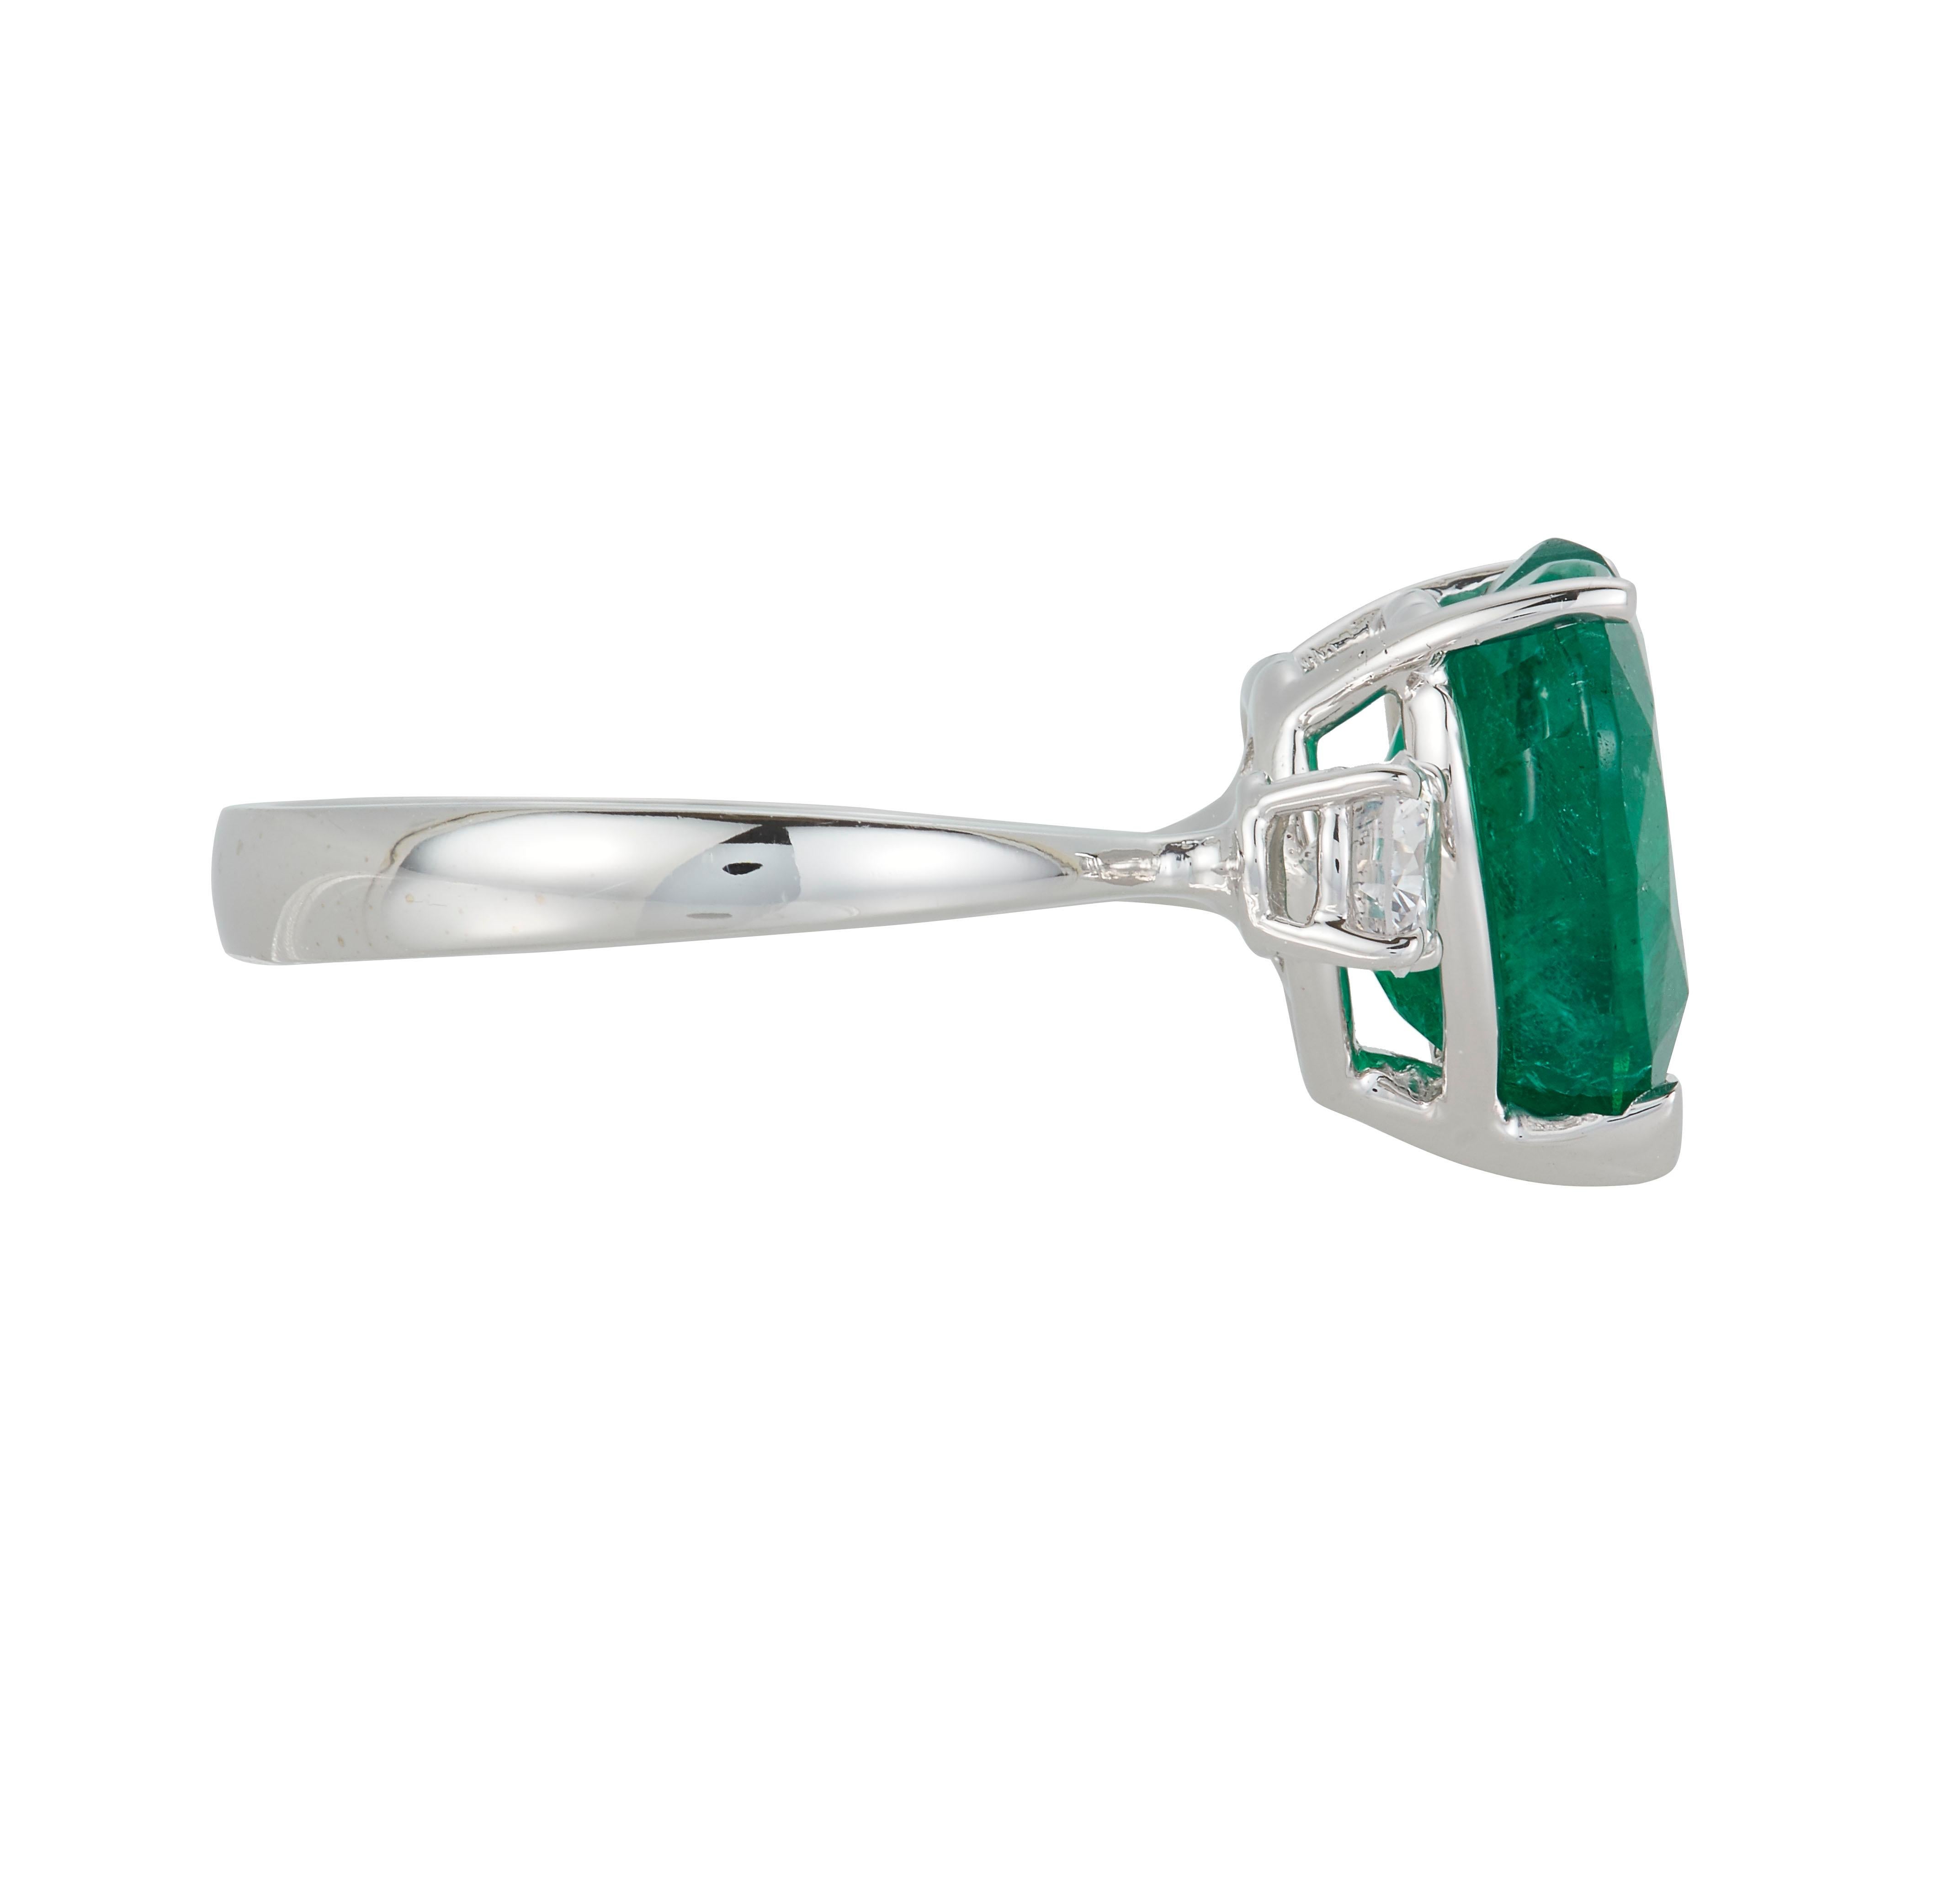 14K White Gold
1 Heart Shaped Emerald at 3.84 Carats- Measuring 11.4 x 11.1 mm
1 Brilliant Round White Diamond at 0.25 Carats - Color: H-I /Clarity: SI

Alberto offers complimentary sizing on all rings.

Fine one-of-a-kind craftsmanship meets